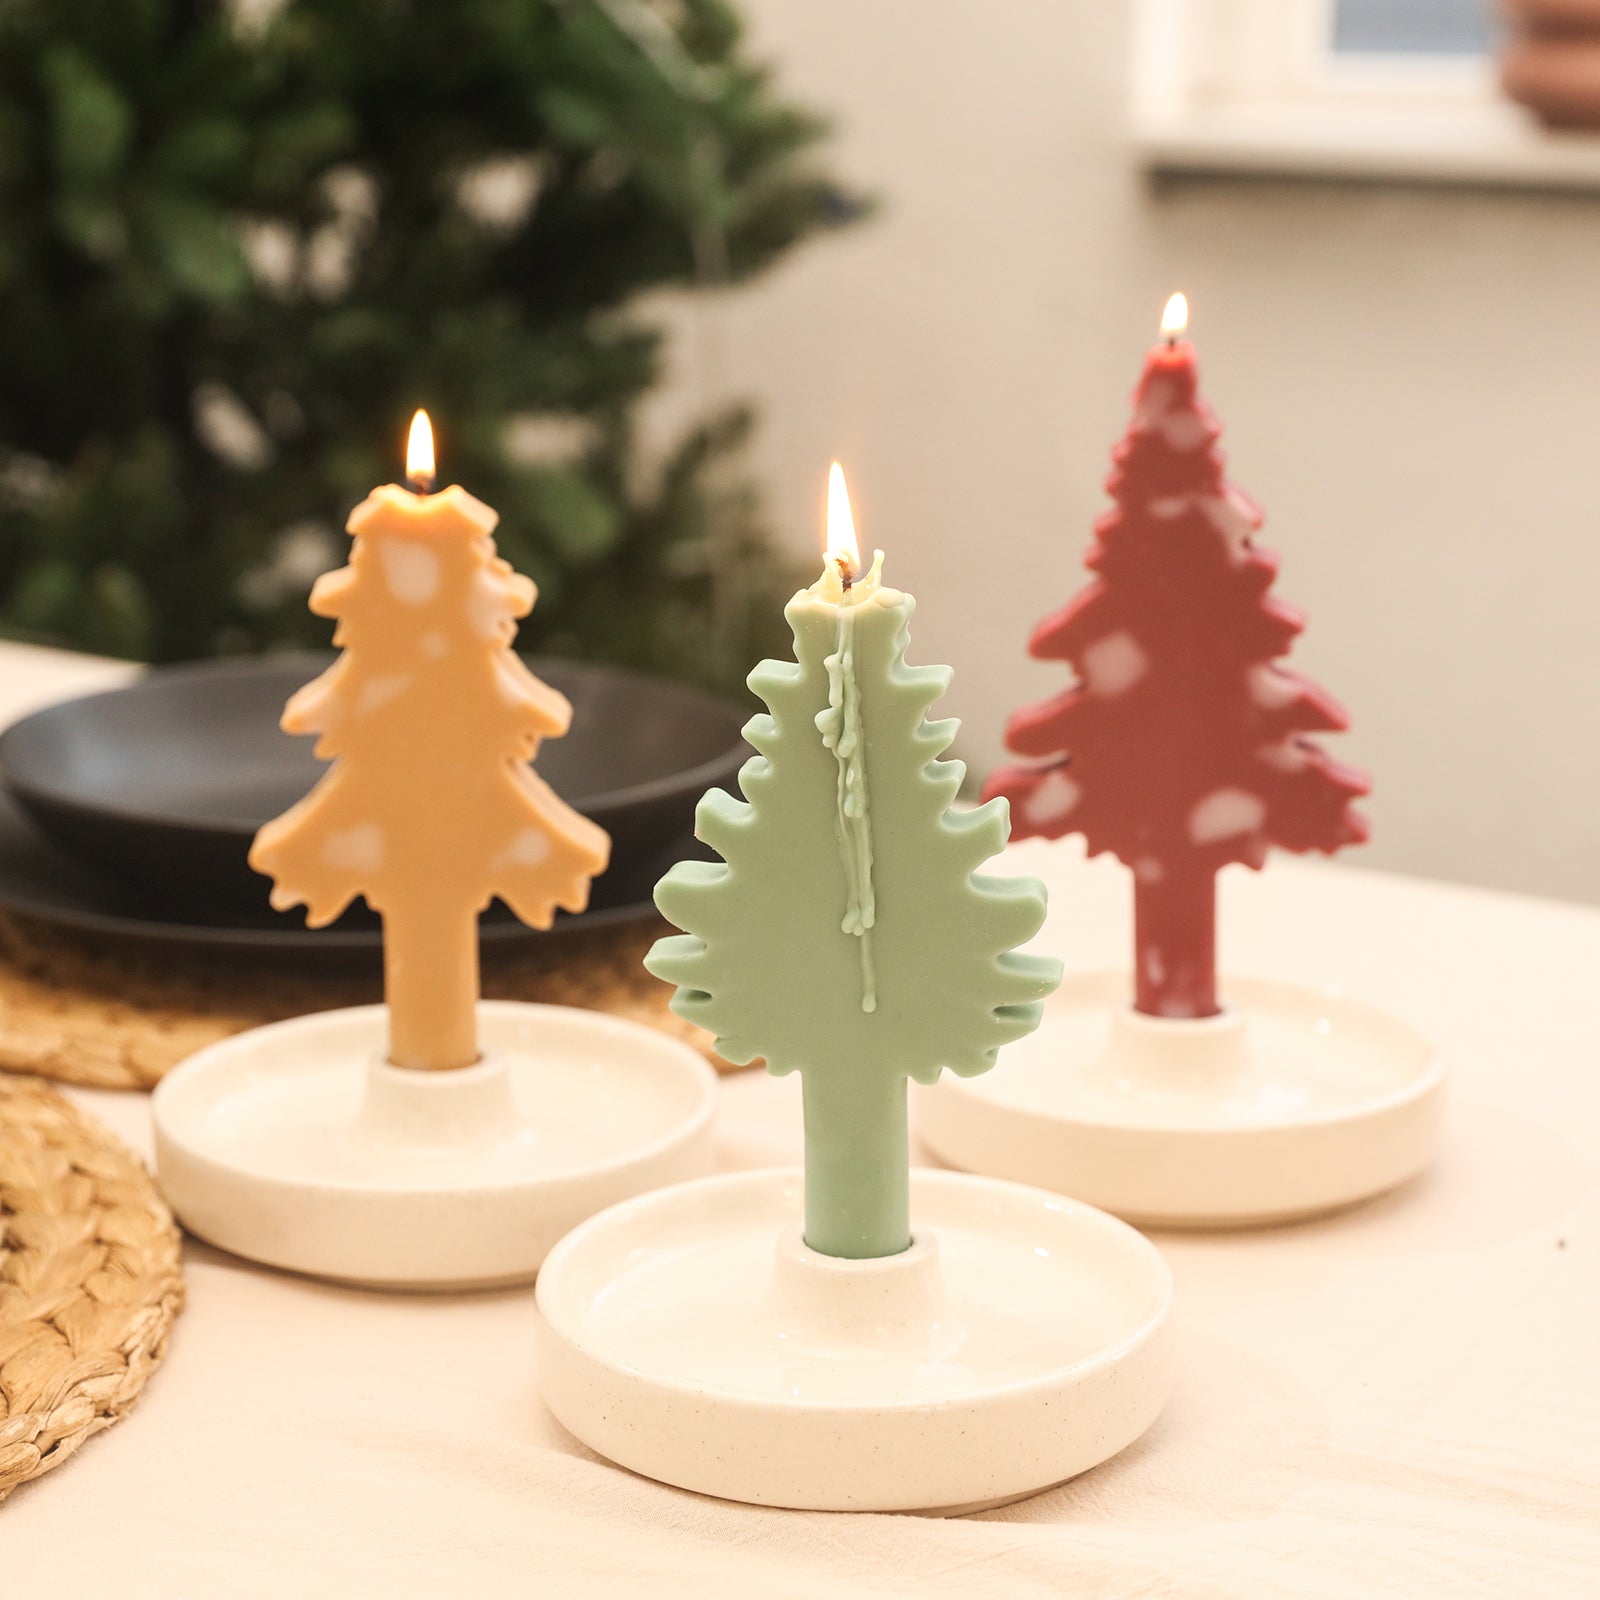 9 - inch Conical Christmas Tree Candle Silicone Mold – Boowan Nicole